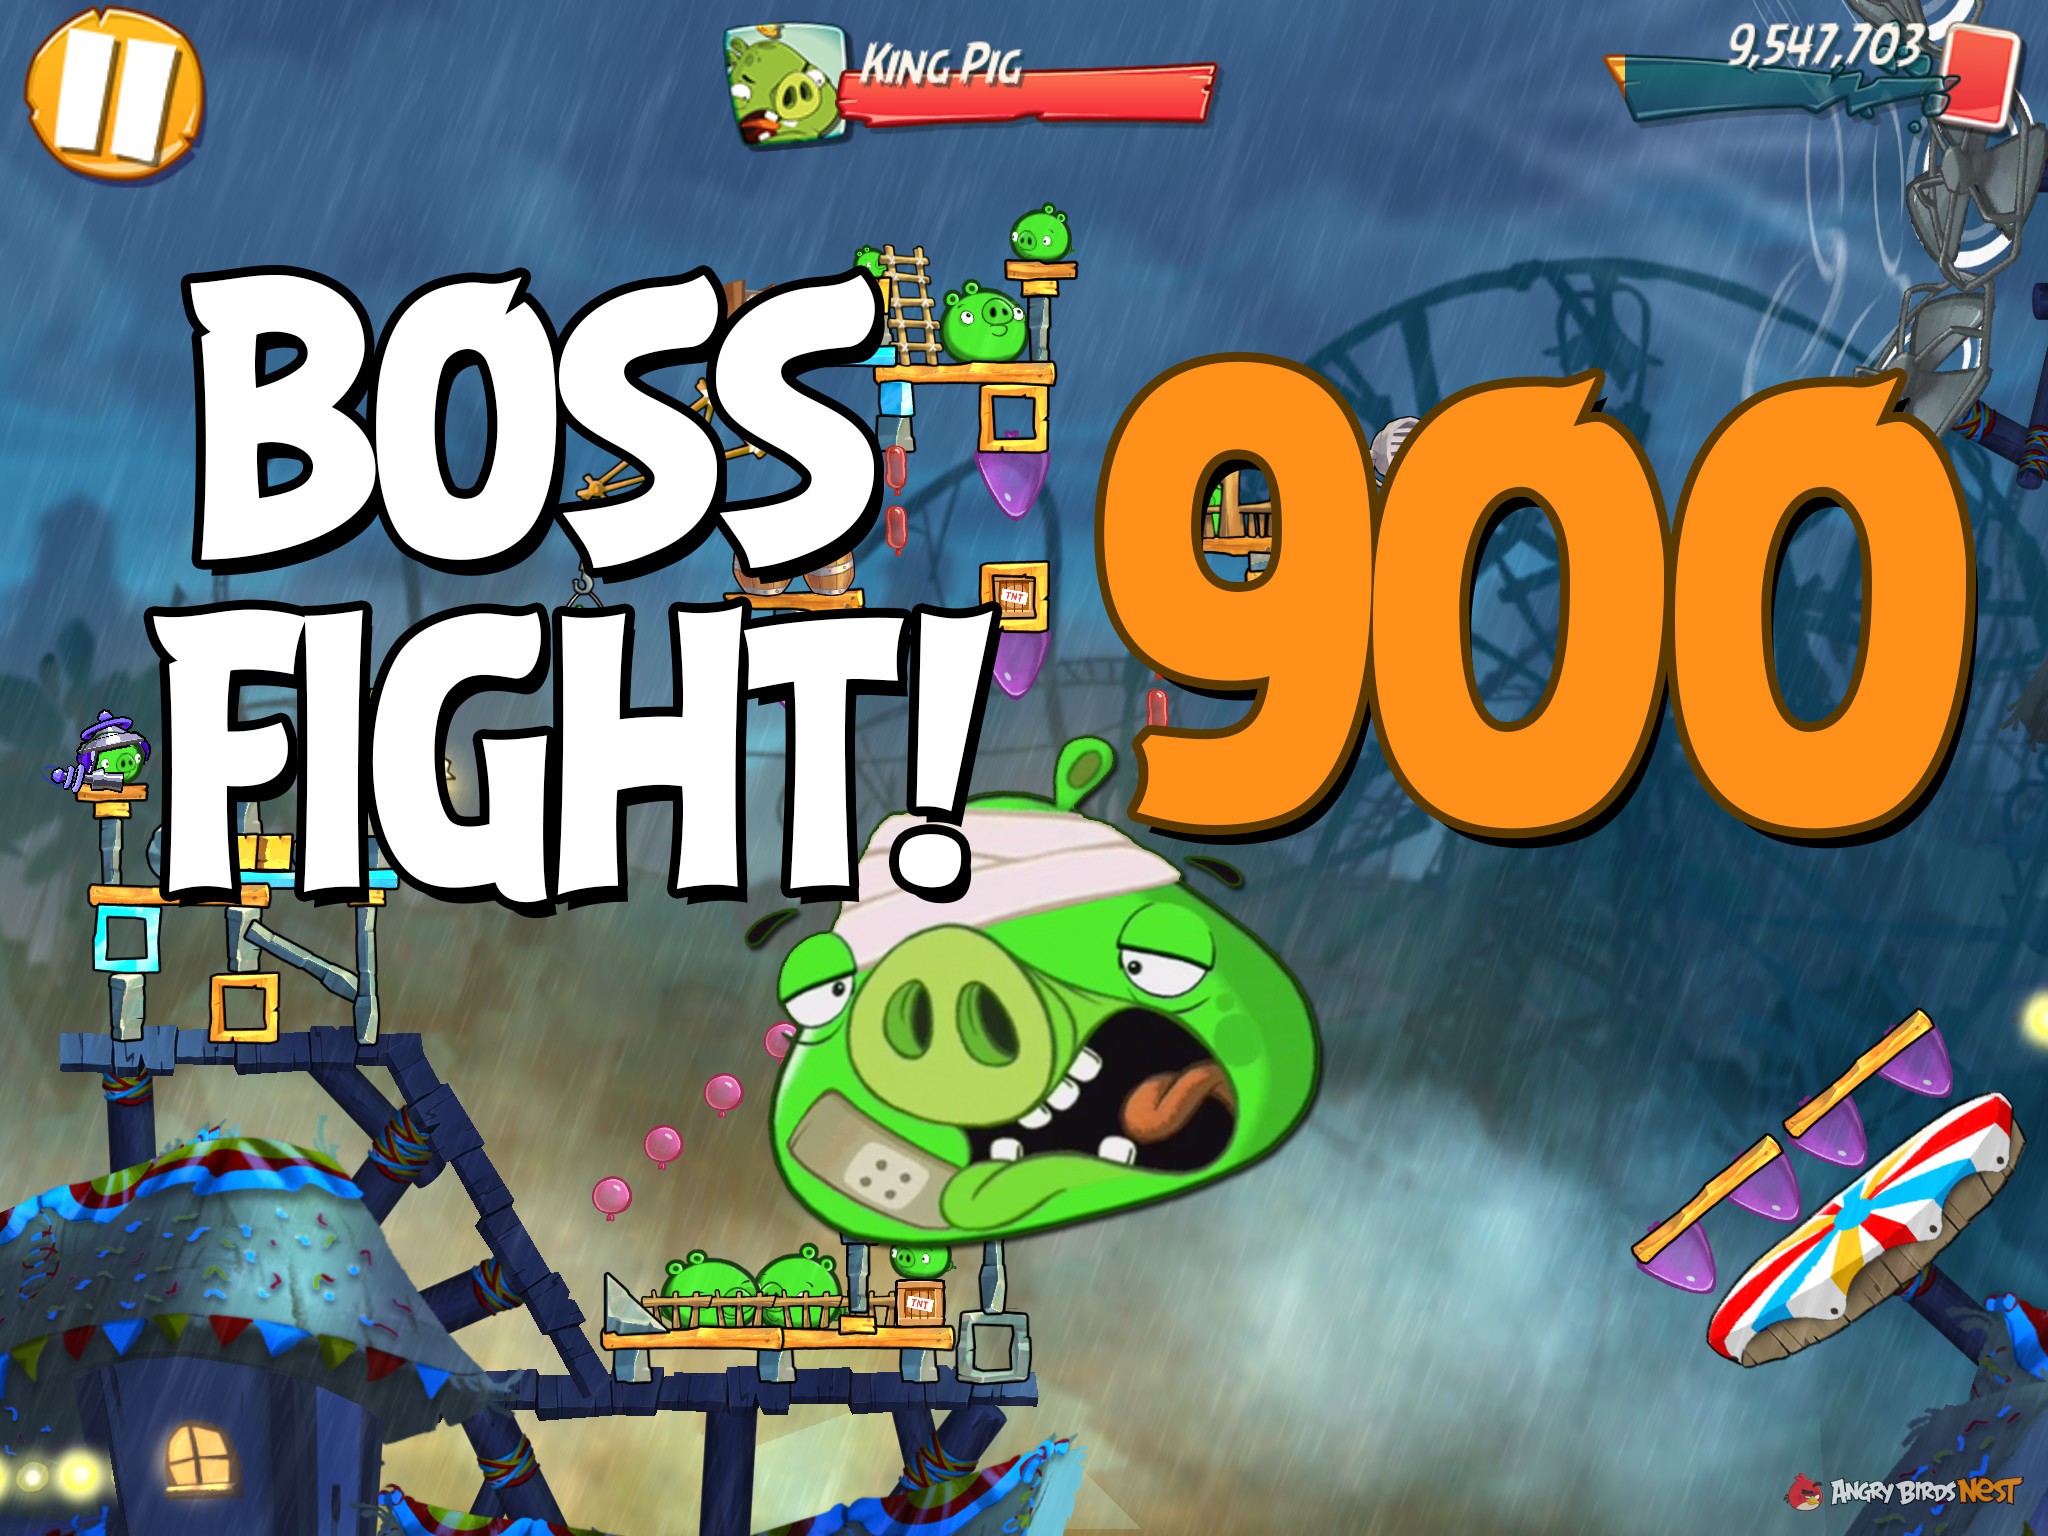 angry-birds-2-boss-fight-level-900